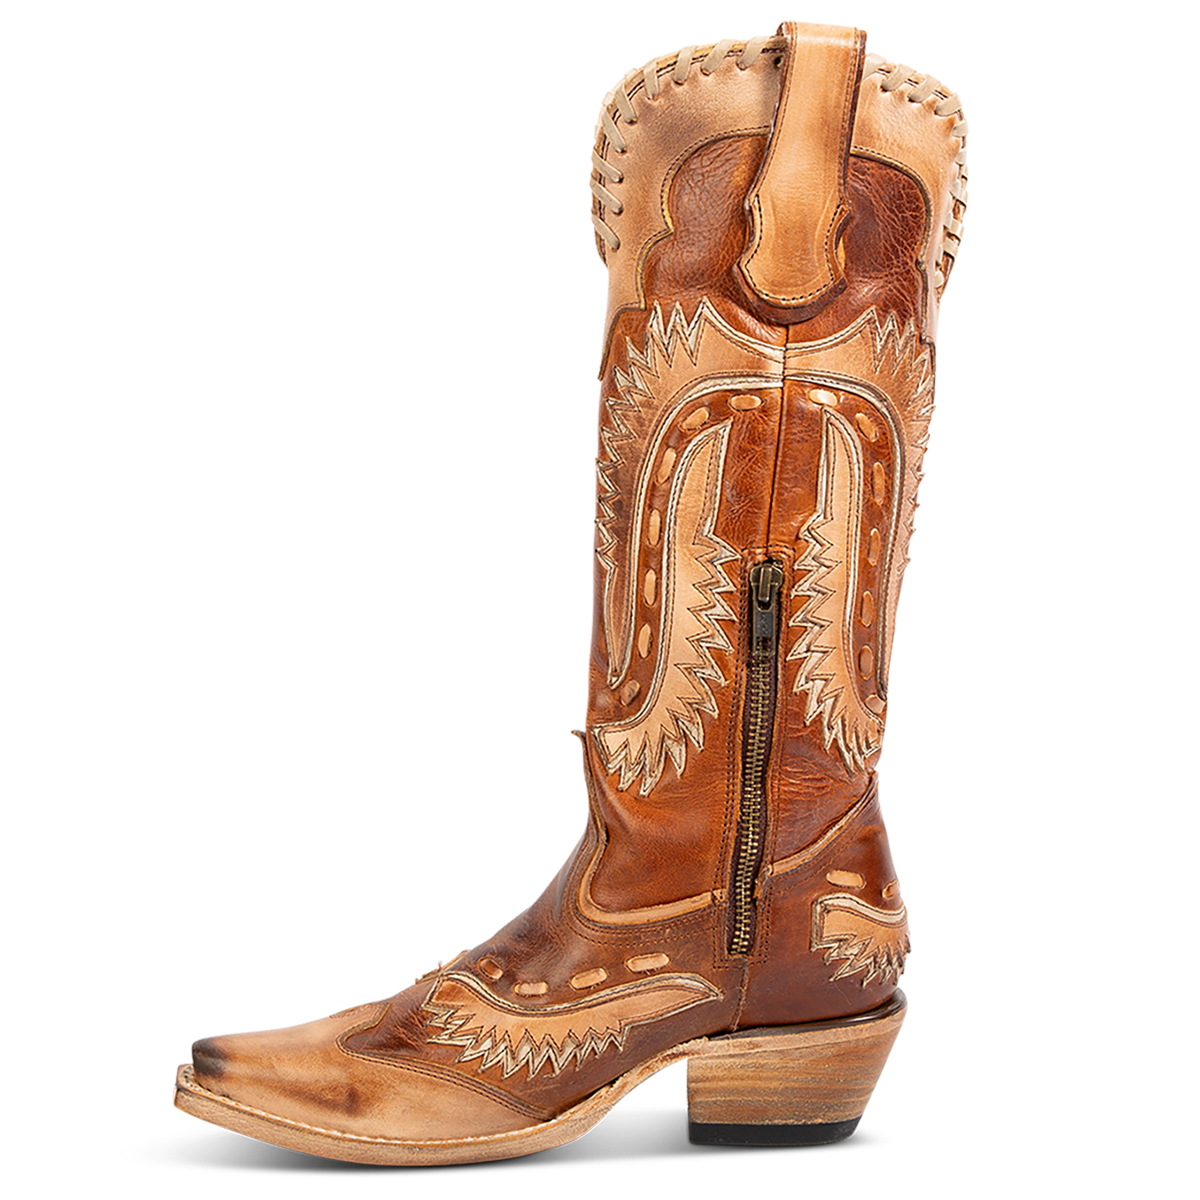 Inside view showing FREEBIRD women's Wayne cognac multi leather western mid-calf boot with whip-stitch and laser cut detailing, a snip toe and inside working brass zipper